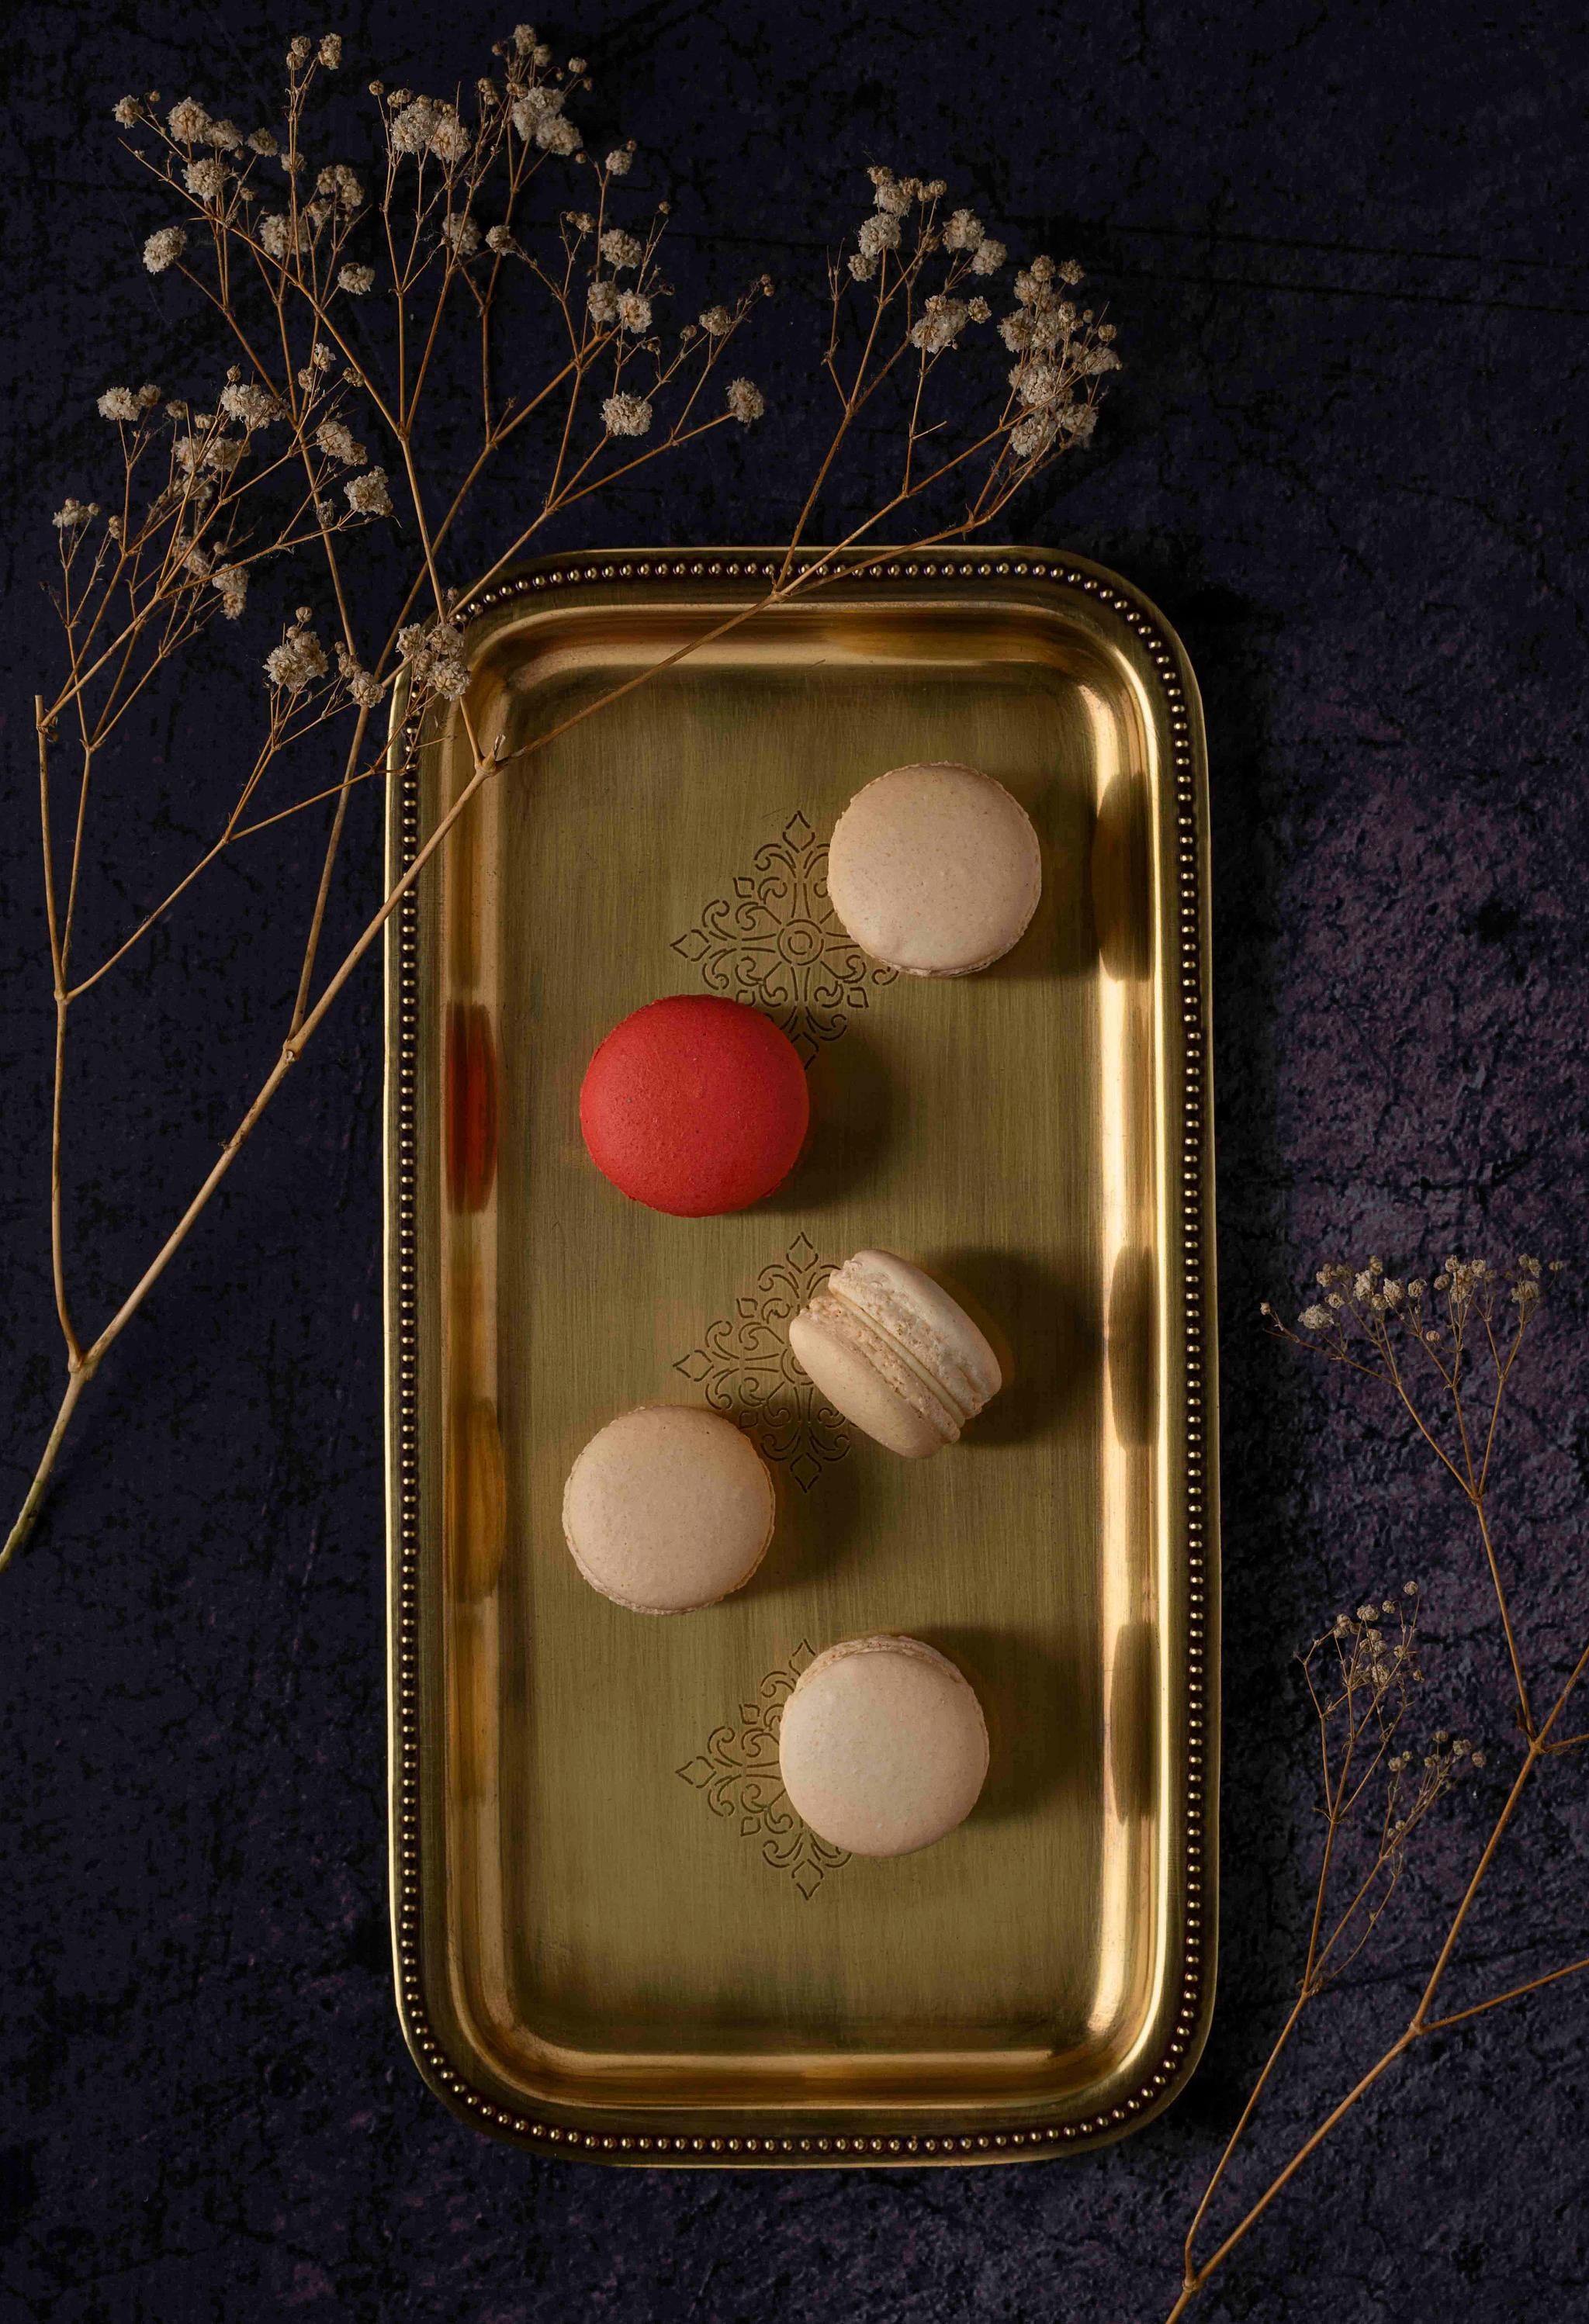 Title: The royal macrons